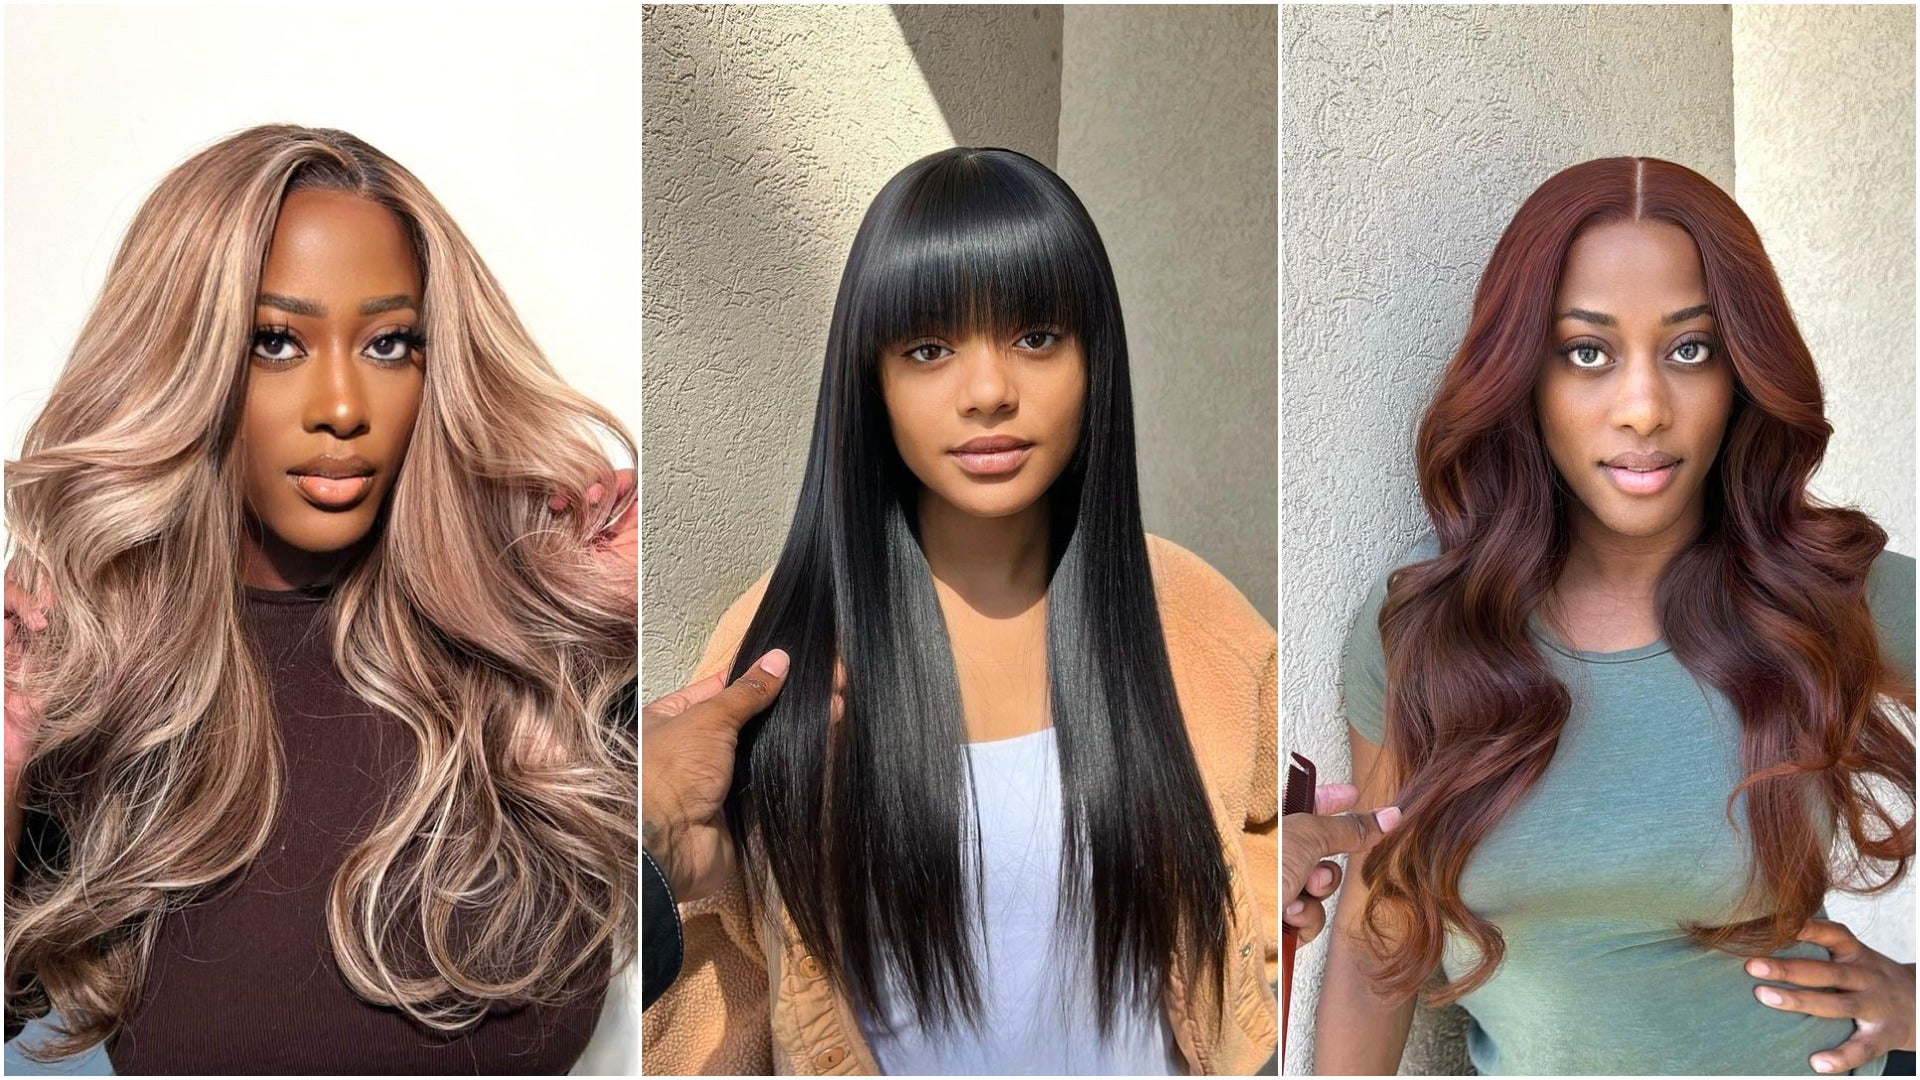 Hw to cut the lace off of your wigs to get a seamless look every